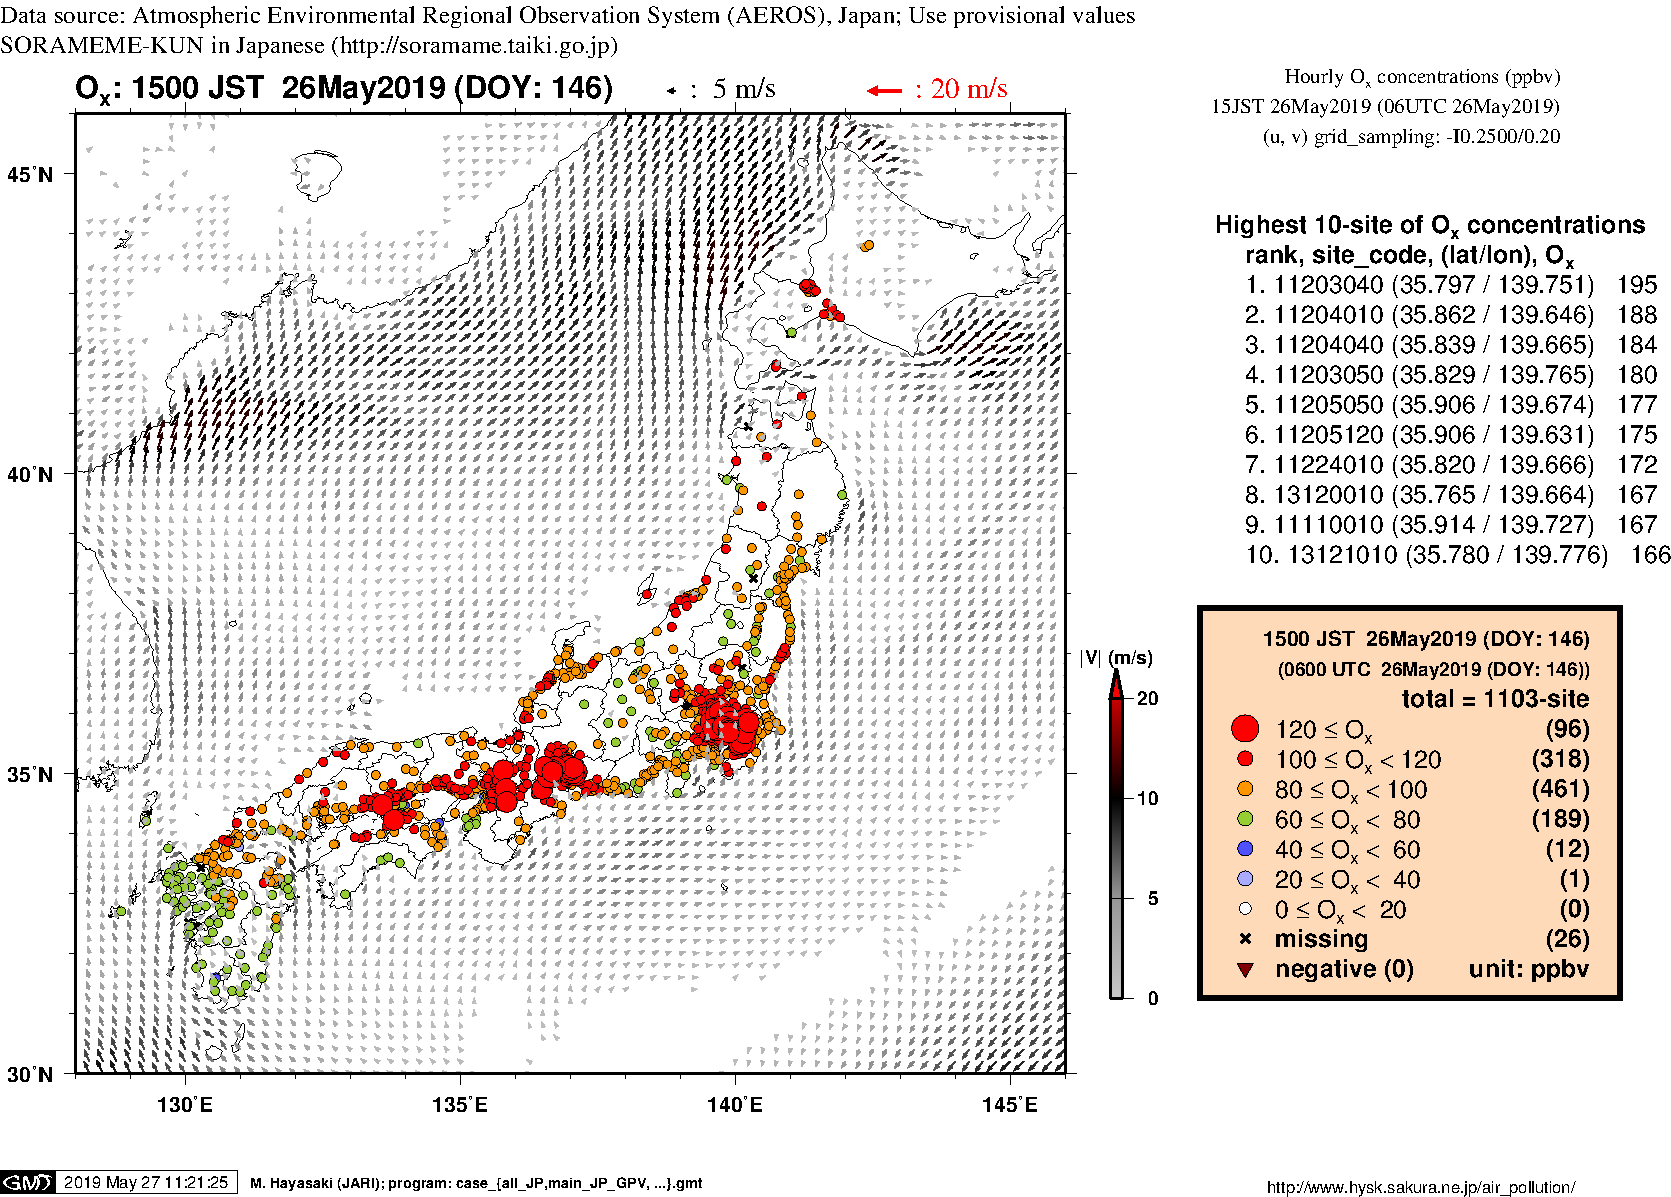 Ox concentration in mainland Japan (15JST 26May2019)